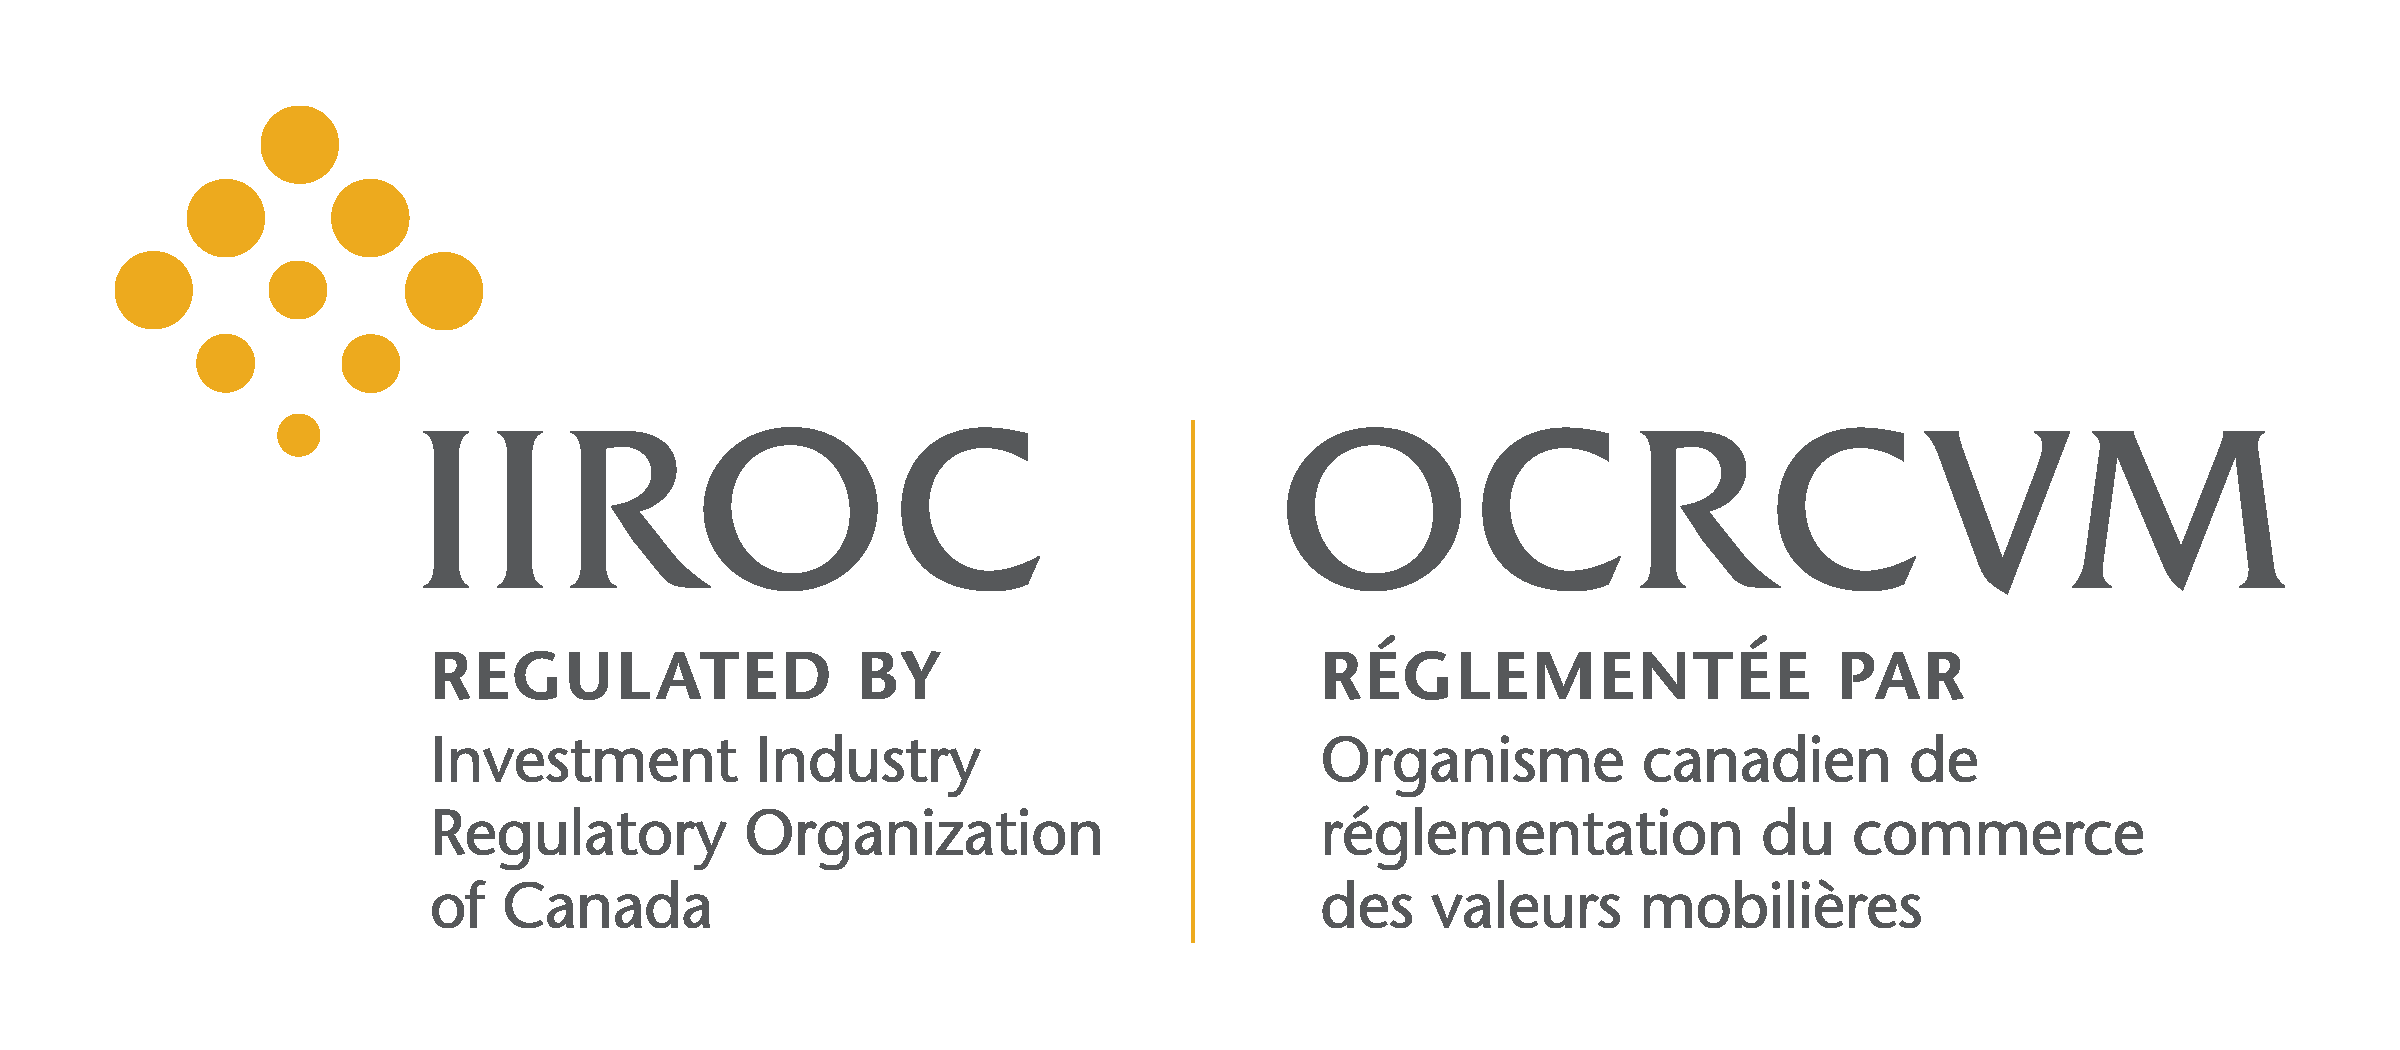 IIROC Regulated by Investment Industry Regulatory Organization of Canada